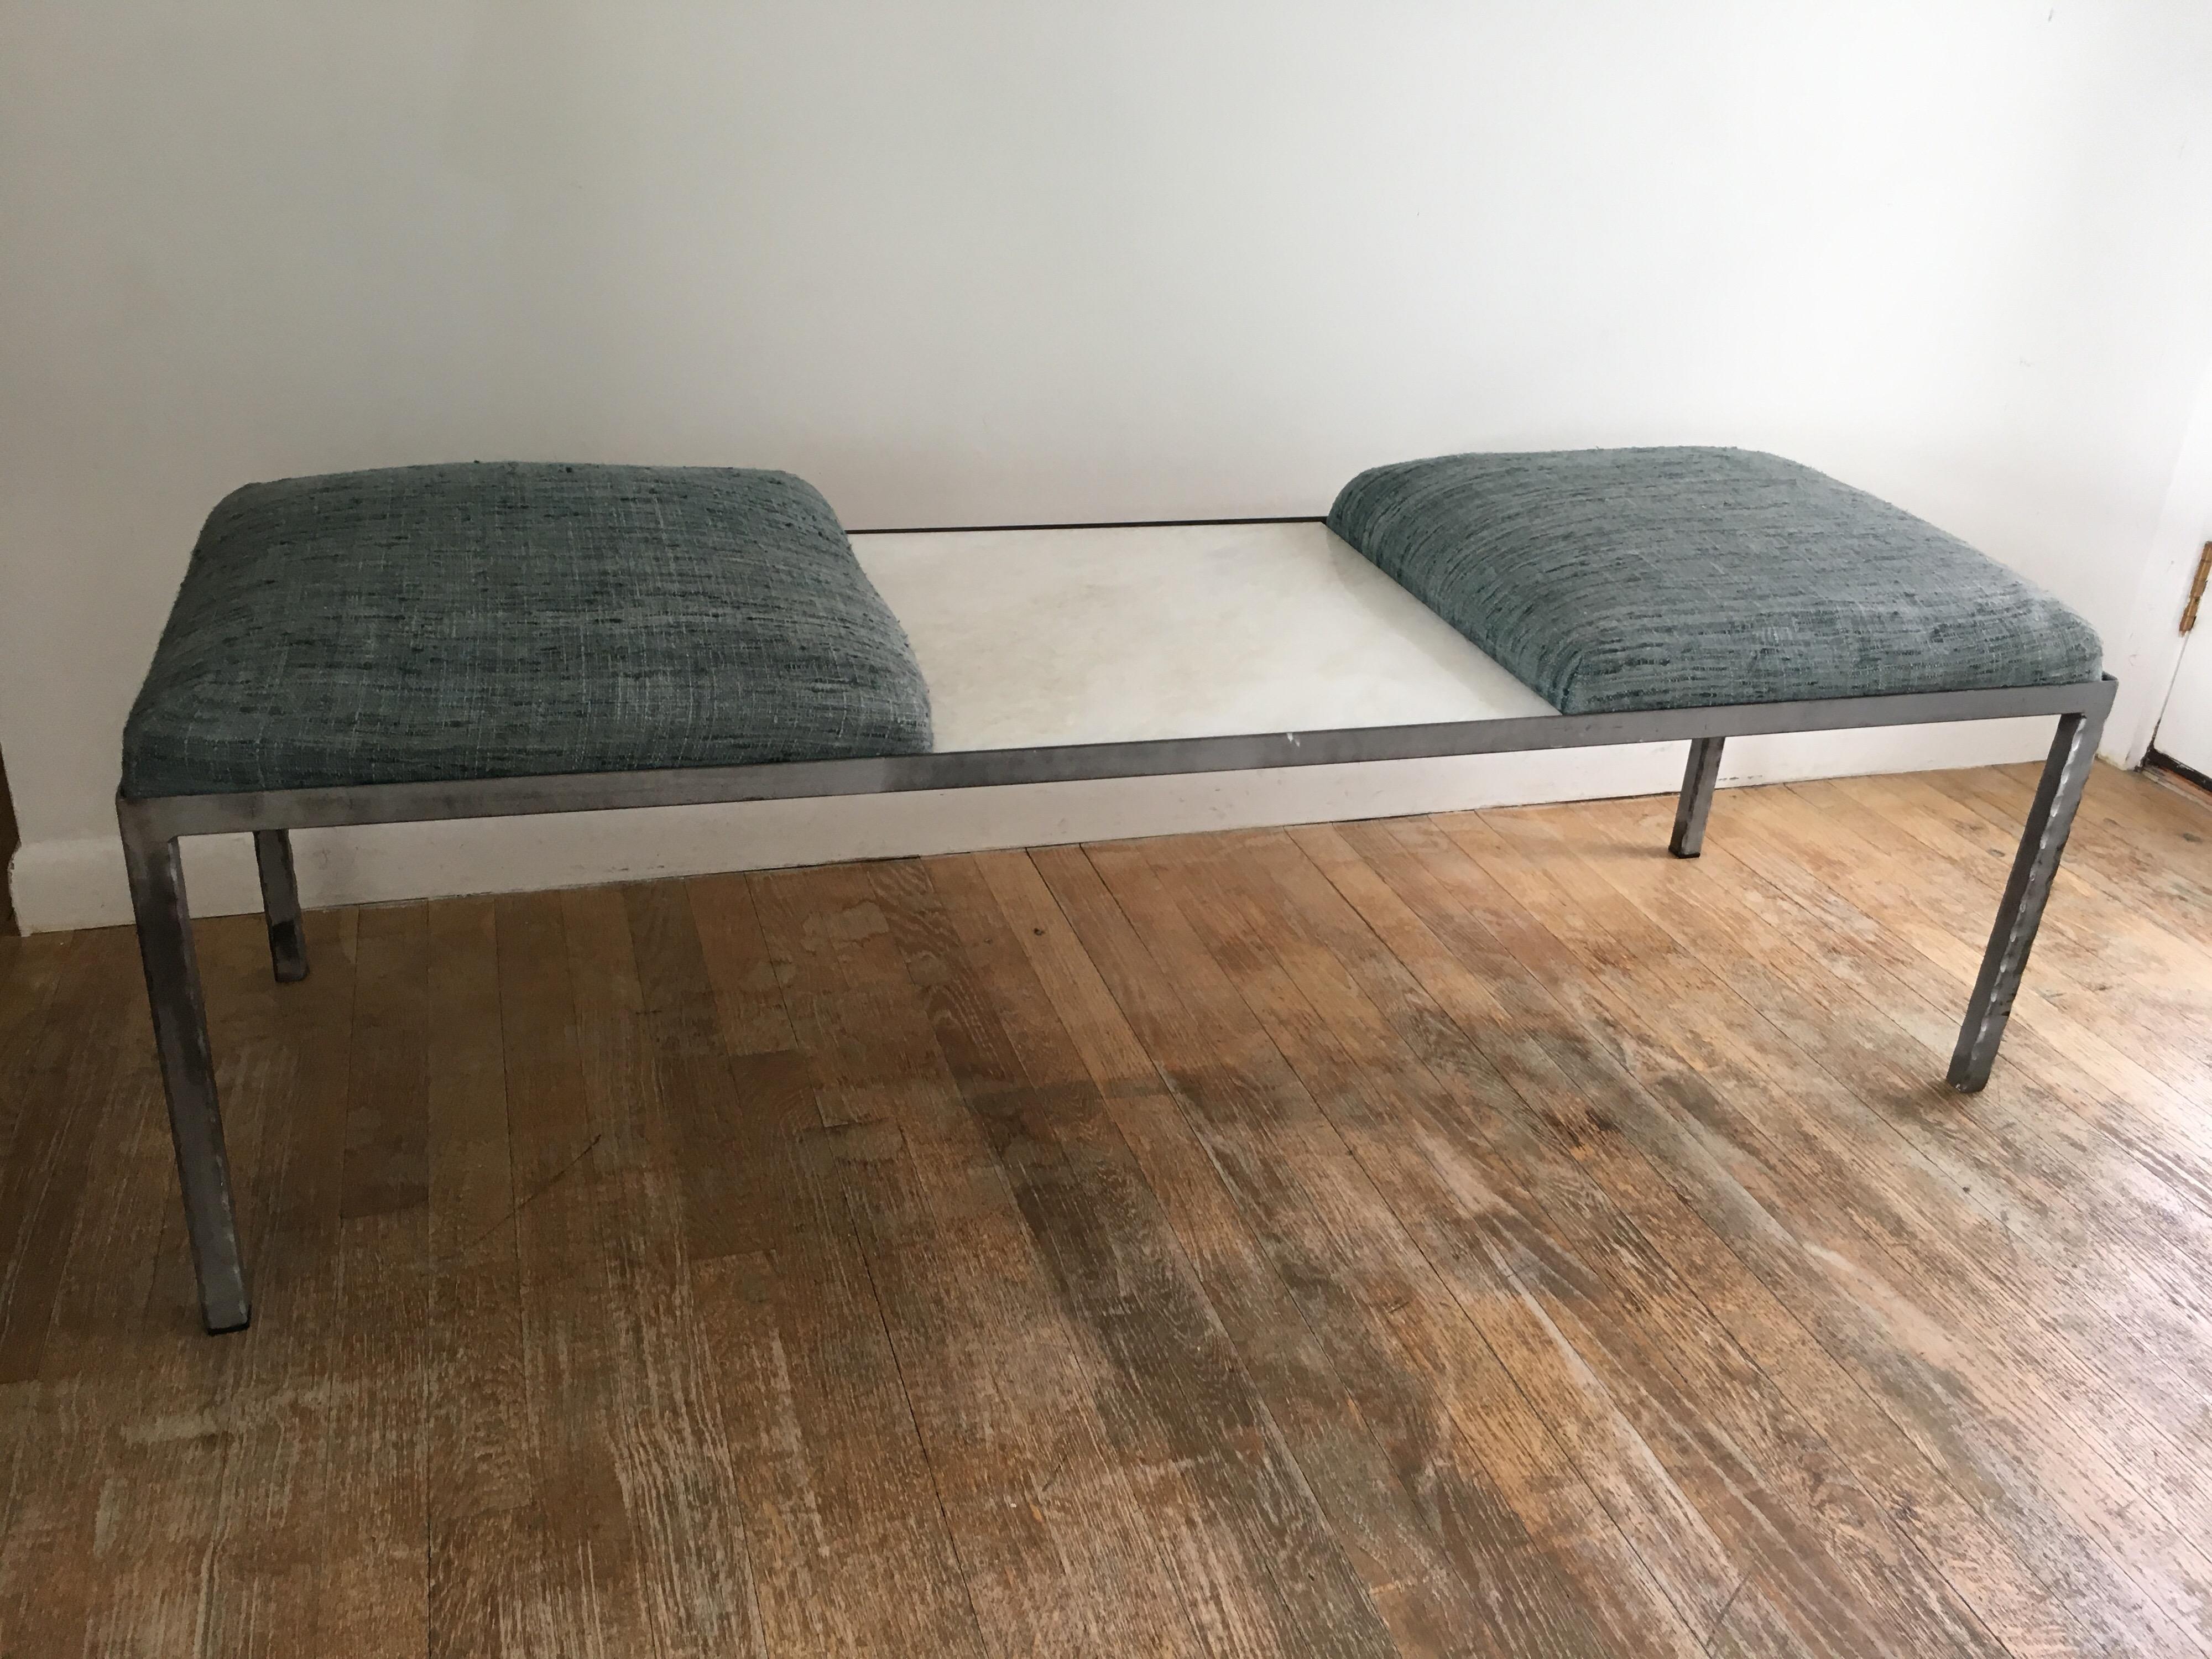 21st century modular iron bench with marble table by Susie Shapiro Design. Three inserts can be interchanged. Two upholstered squares in deep sea green silk linen fabric. One white Marble insert can be used as an end table or centred (shown